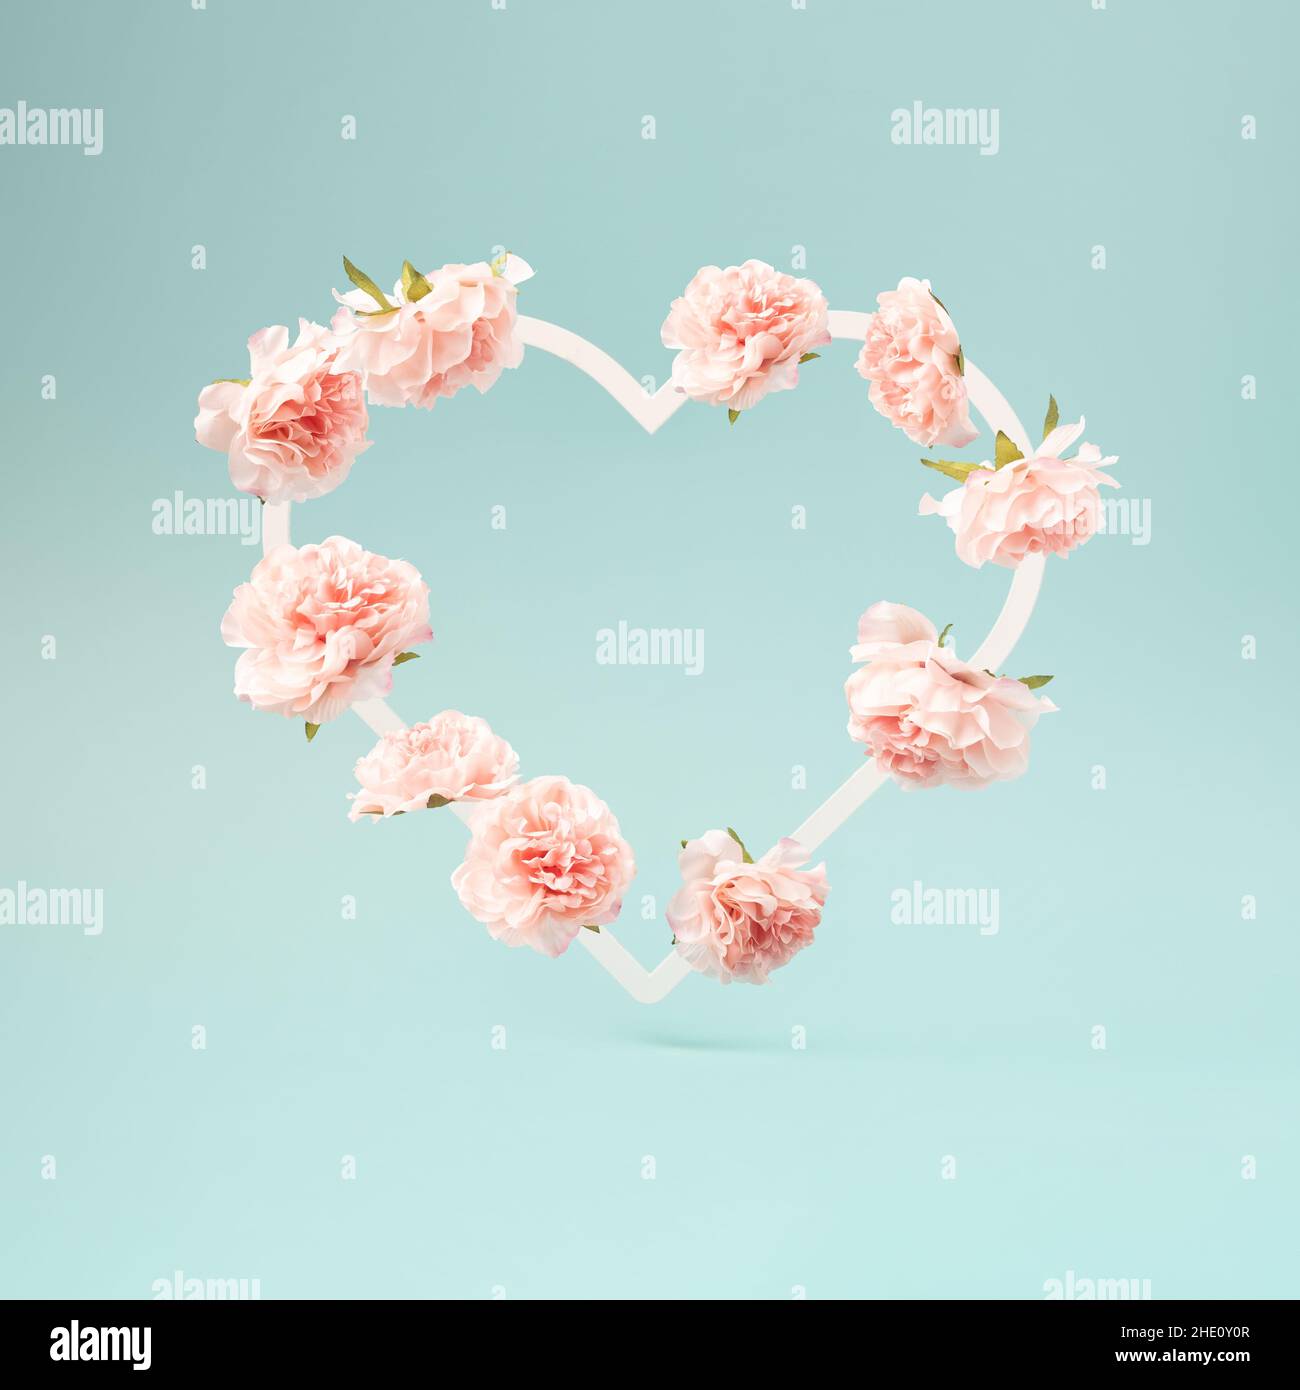 Flowers arranged in a heart shape on a pastel blue background. Romance and love minimal studio shot. Stock Photo